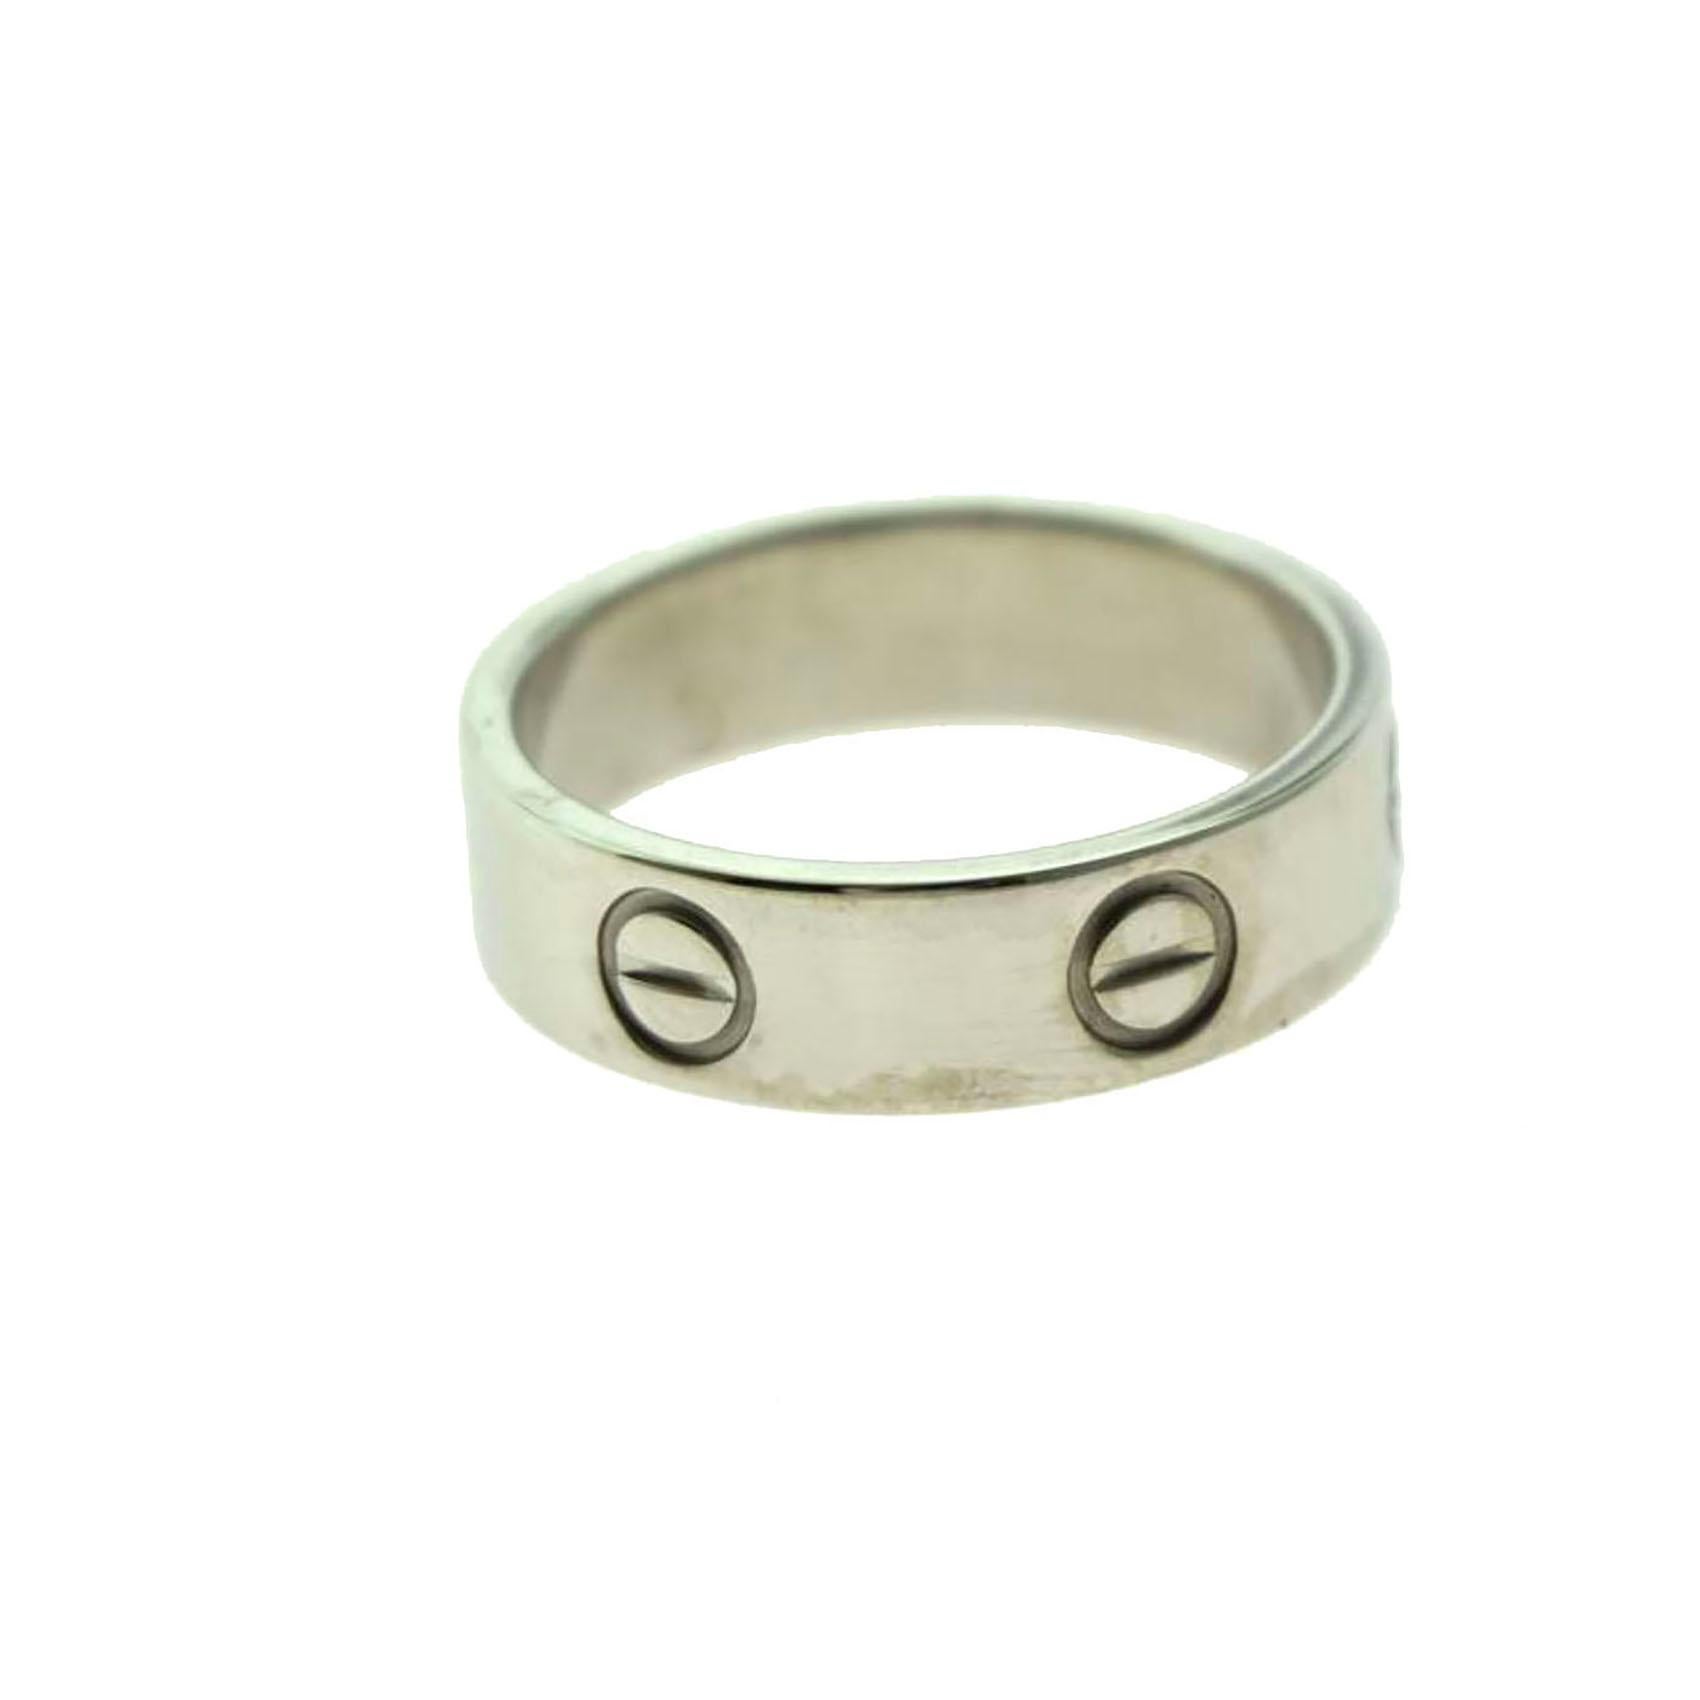 Designer: Cartier

Collection: Love

Style: Ring

Metal: White Gold

Metal Purity: 18k

Ring Size: 55 (euro) ; 7.25 (US)

Includes:  24 Months Brilliance Jewels Warranty

                        Box     

                        Appraisal (upon